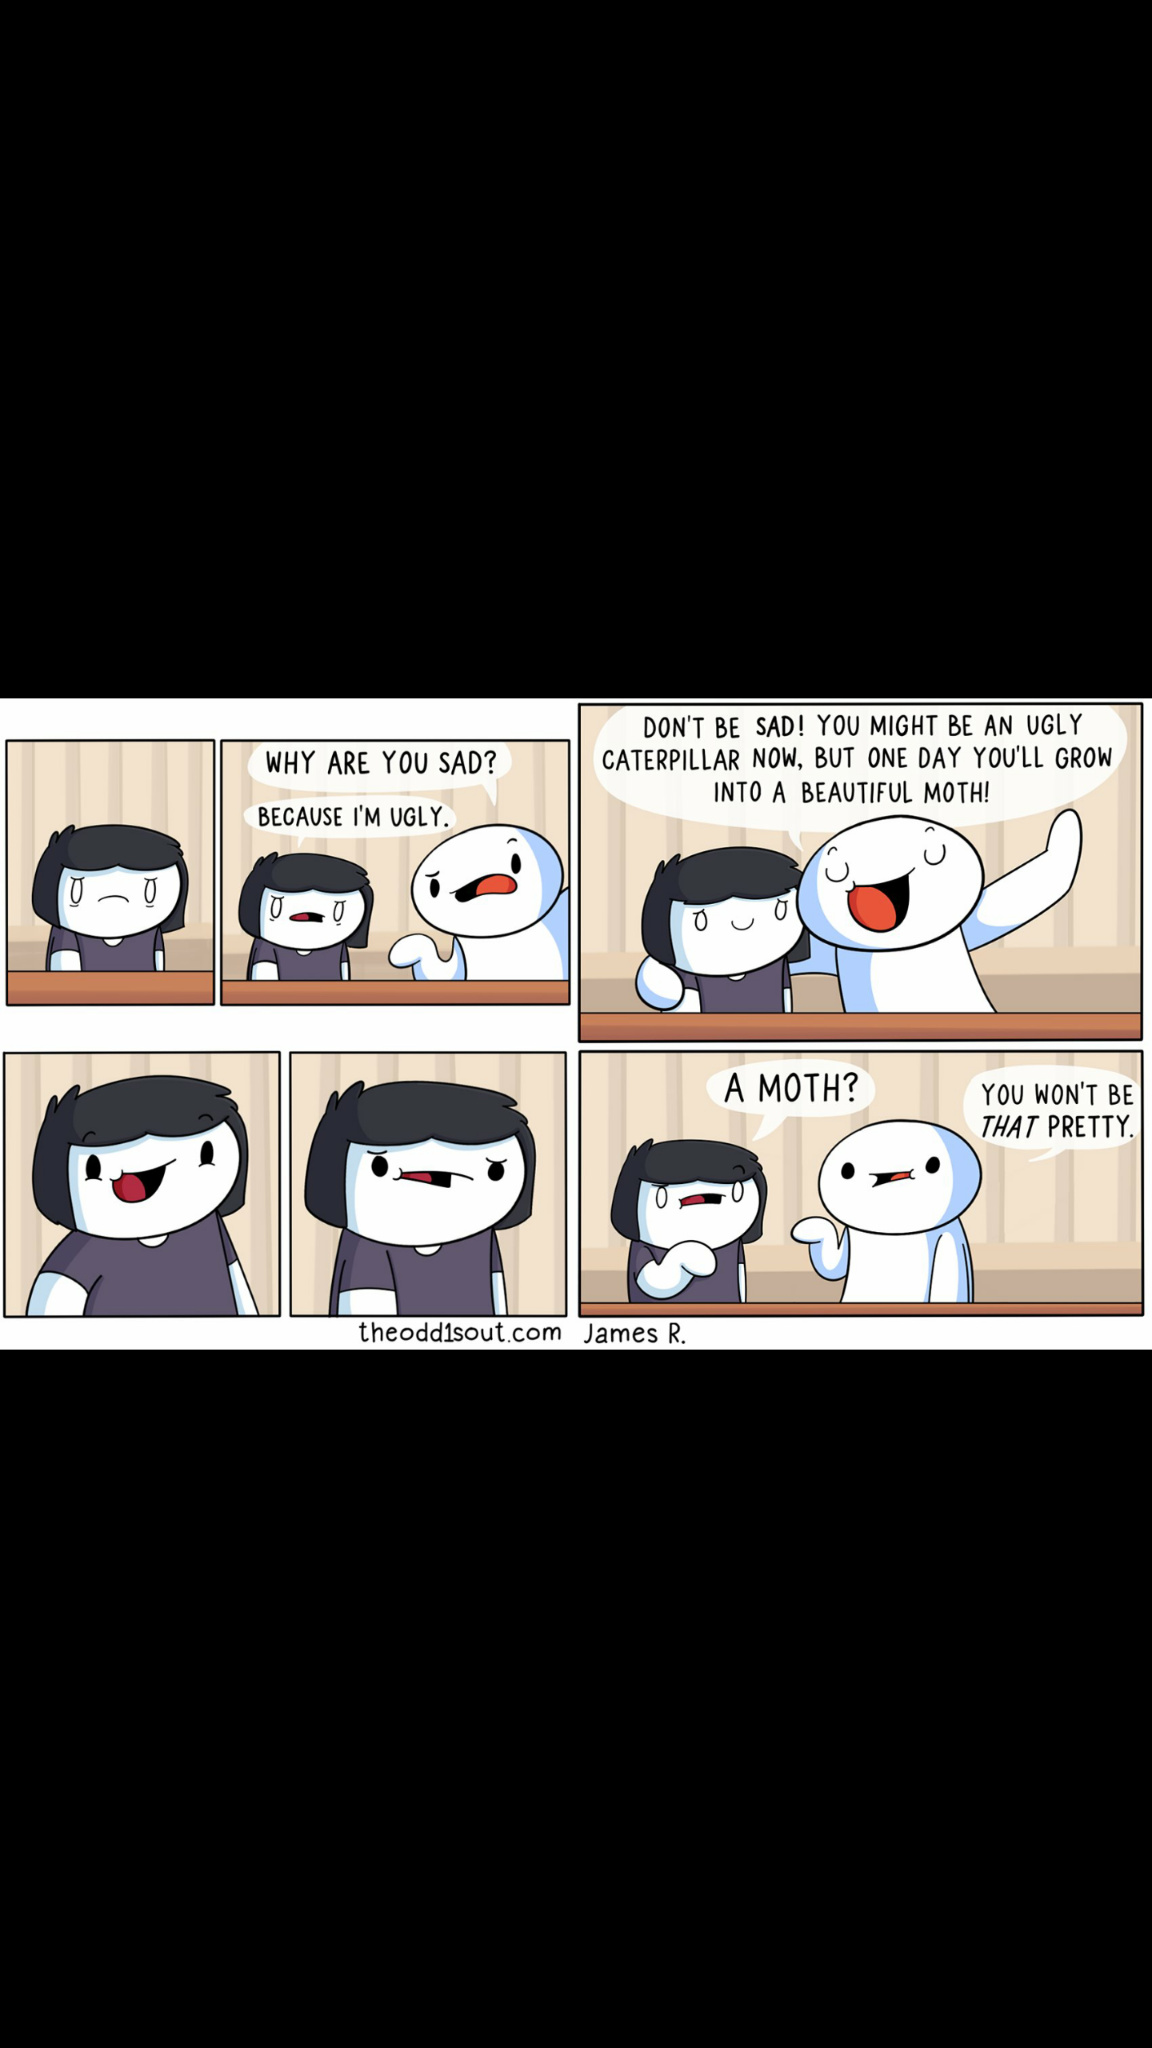 Made by theodd1'sout - meme